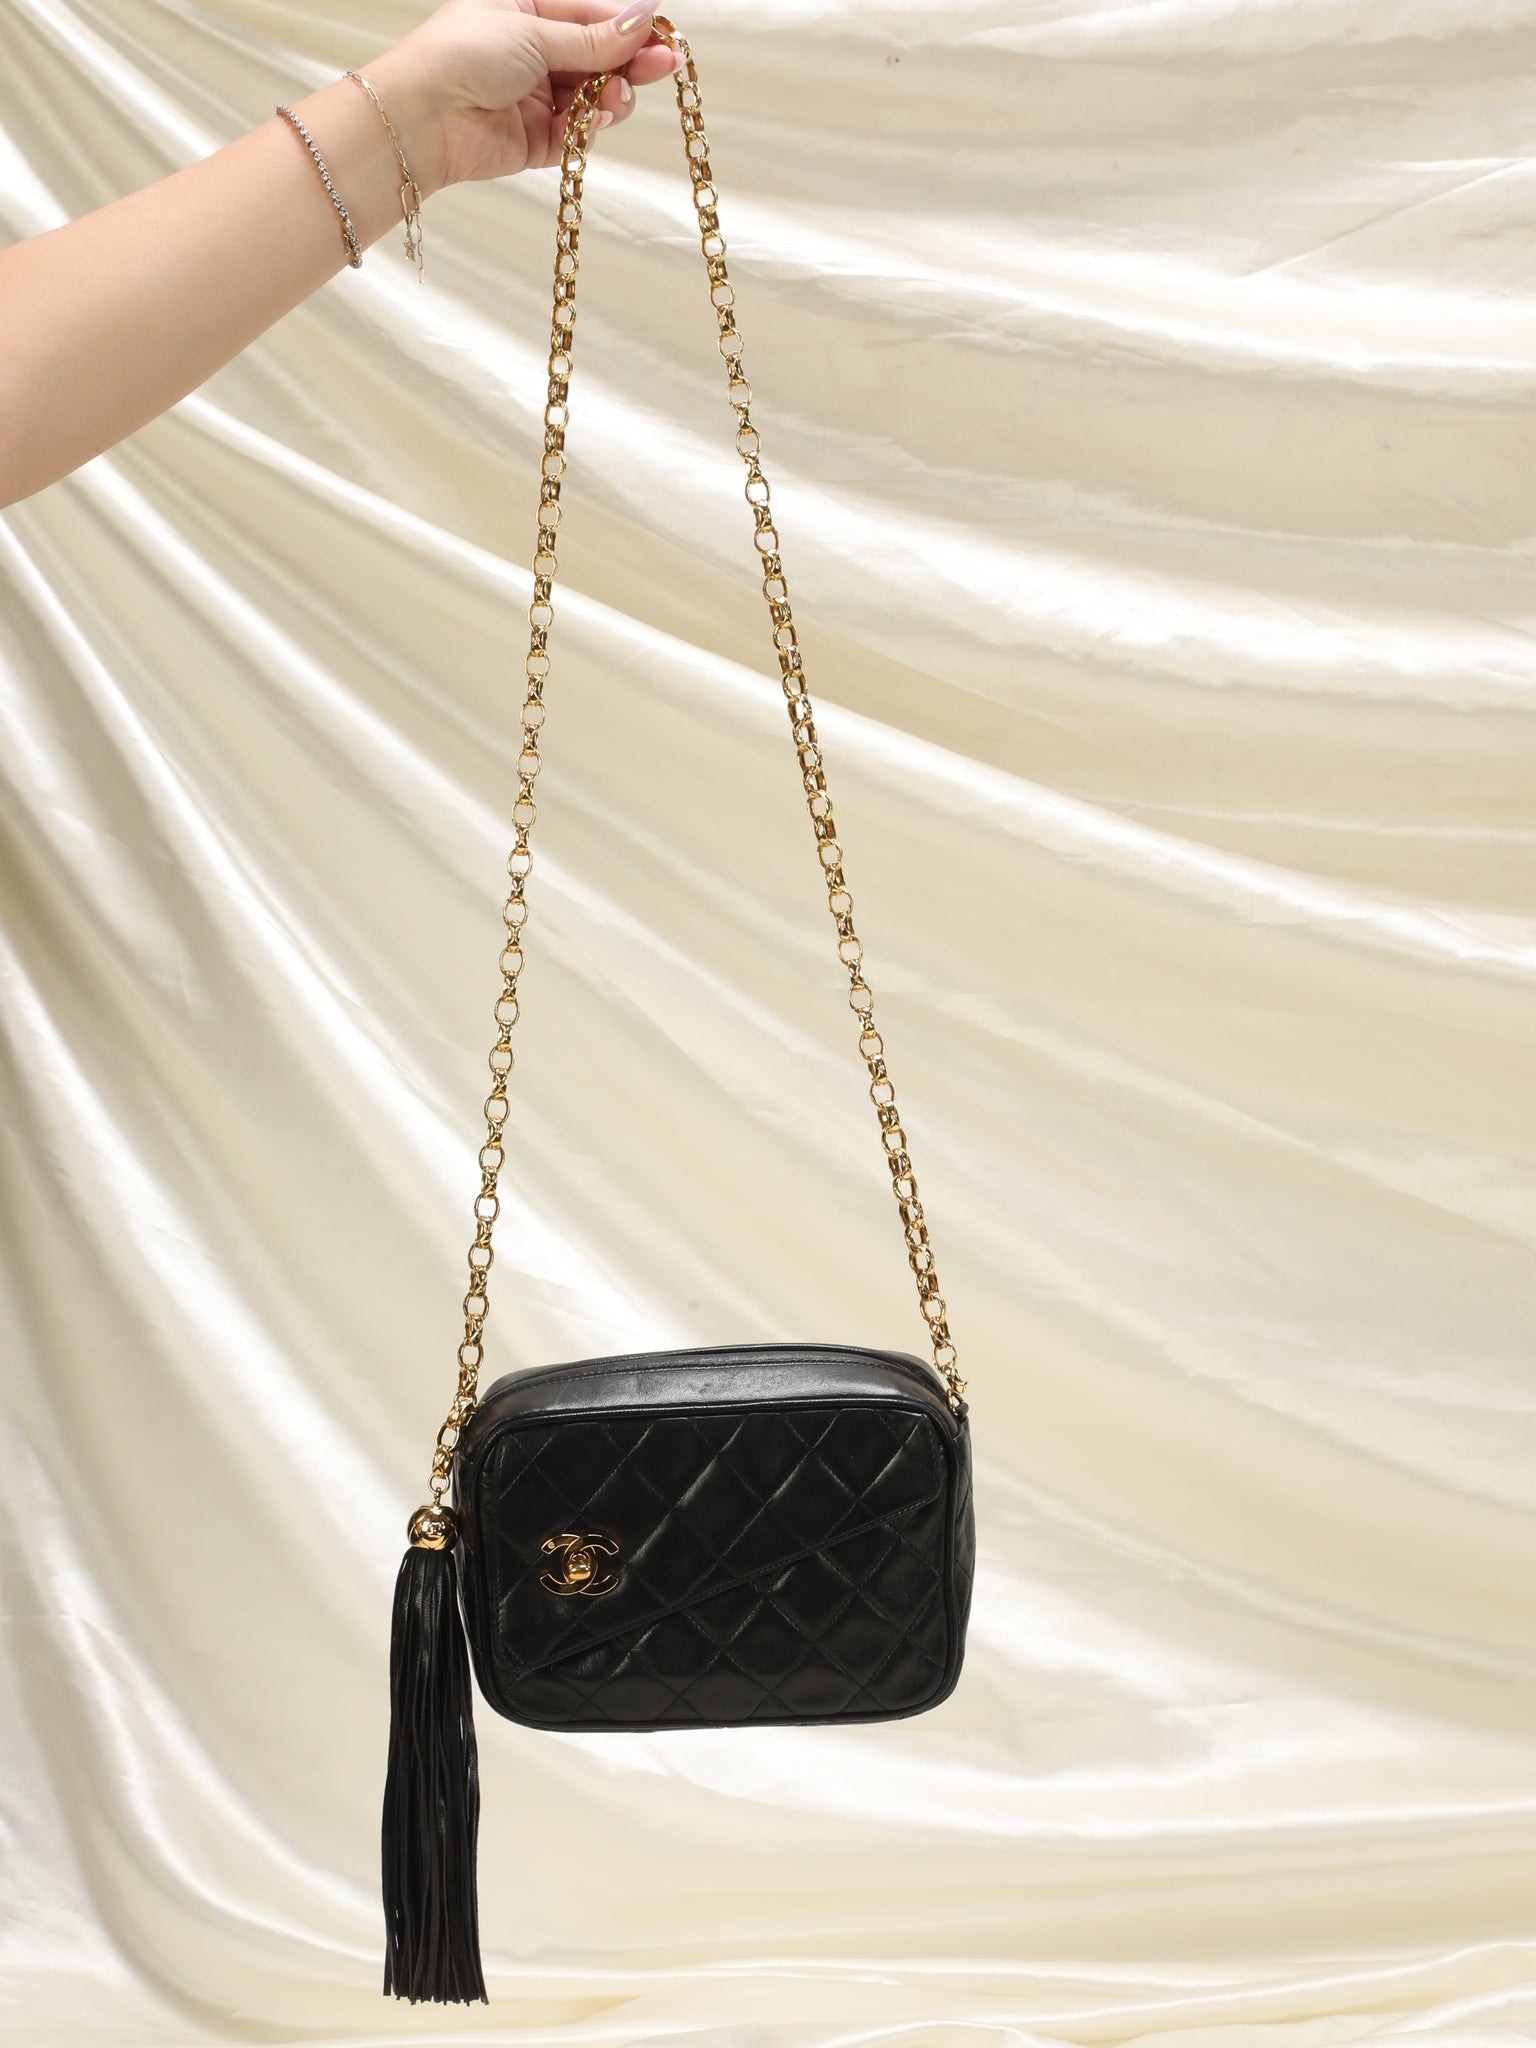 Chanel Beige and Black Caviar Quilted Round Filigree Crossbody